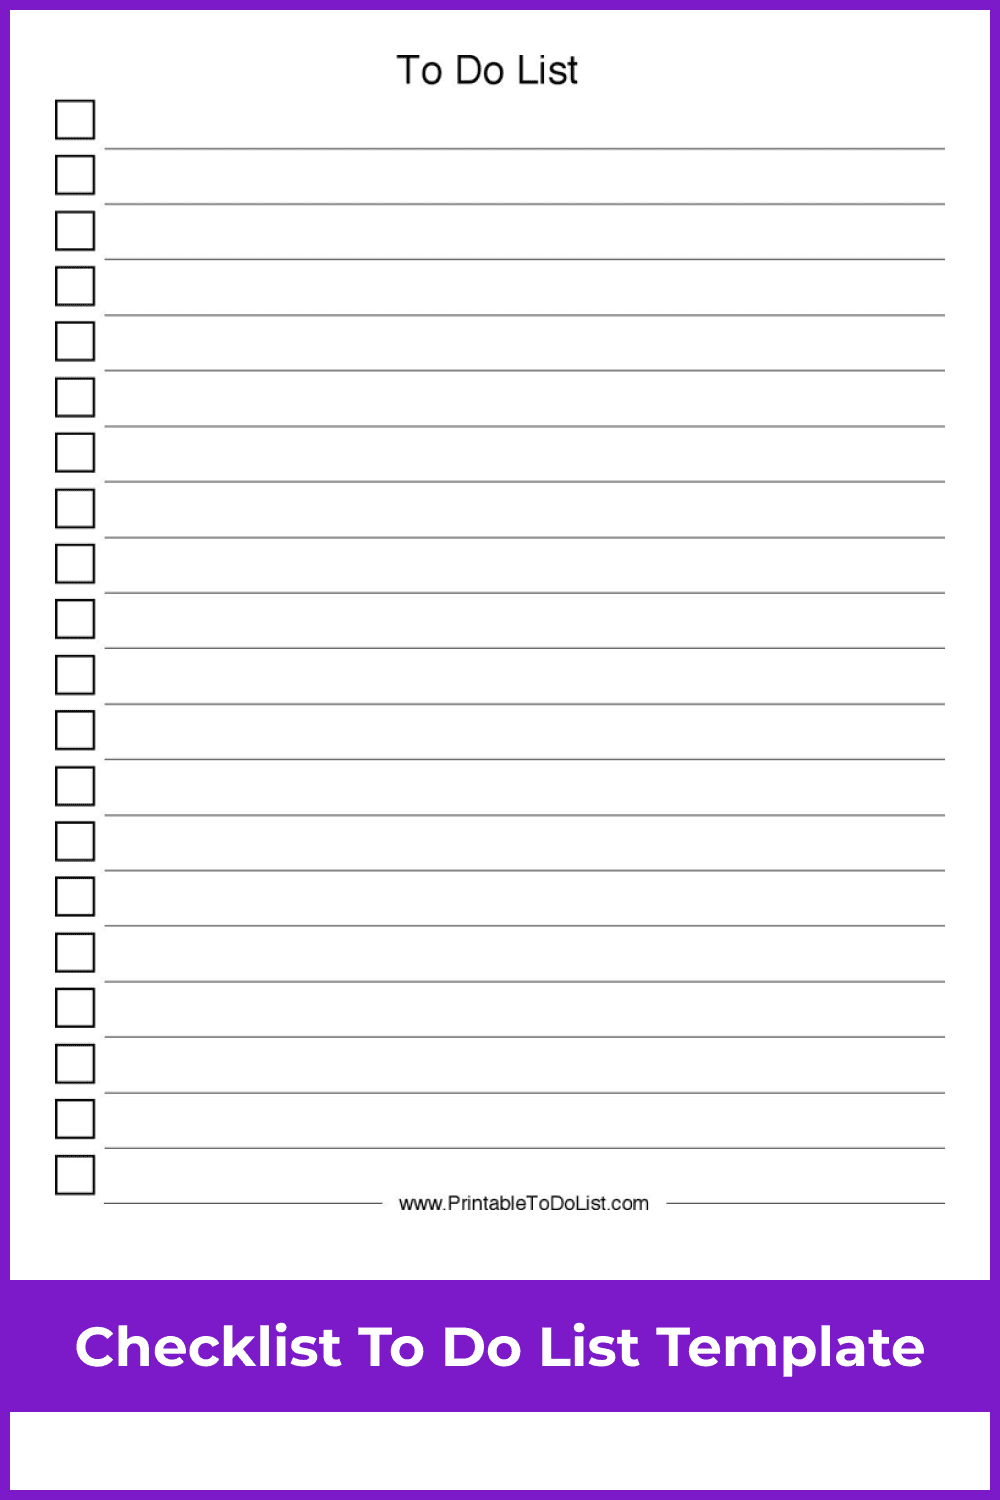 Lines and places for checkmarks are outlined on a white sheet.